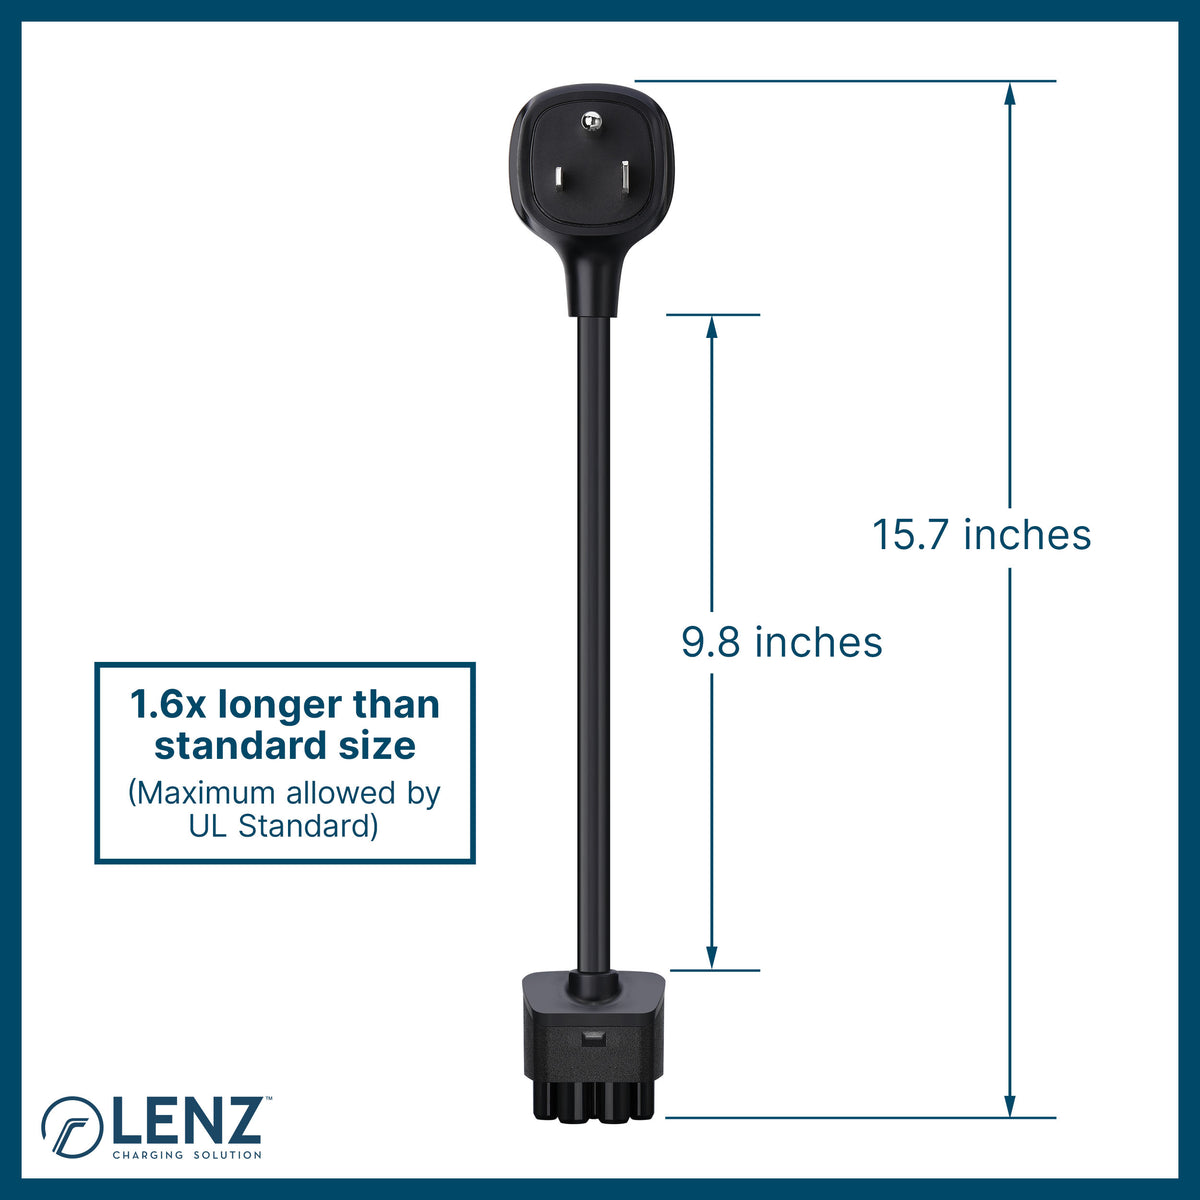 LENZ NEMA 6-50 Adapter for Tesla Gen 2 Mobile Connector Measures 15.7 inches end-to-end